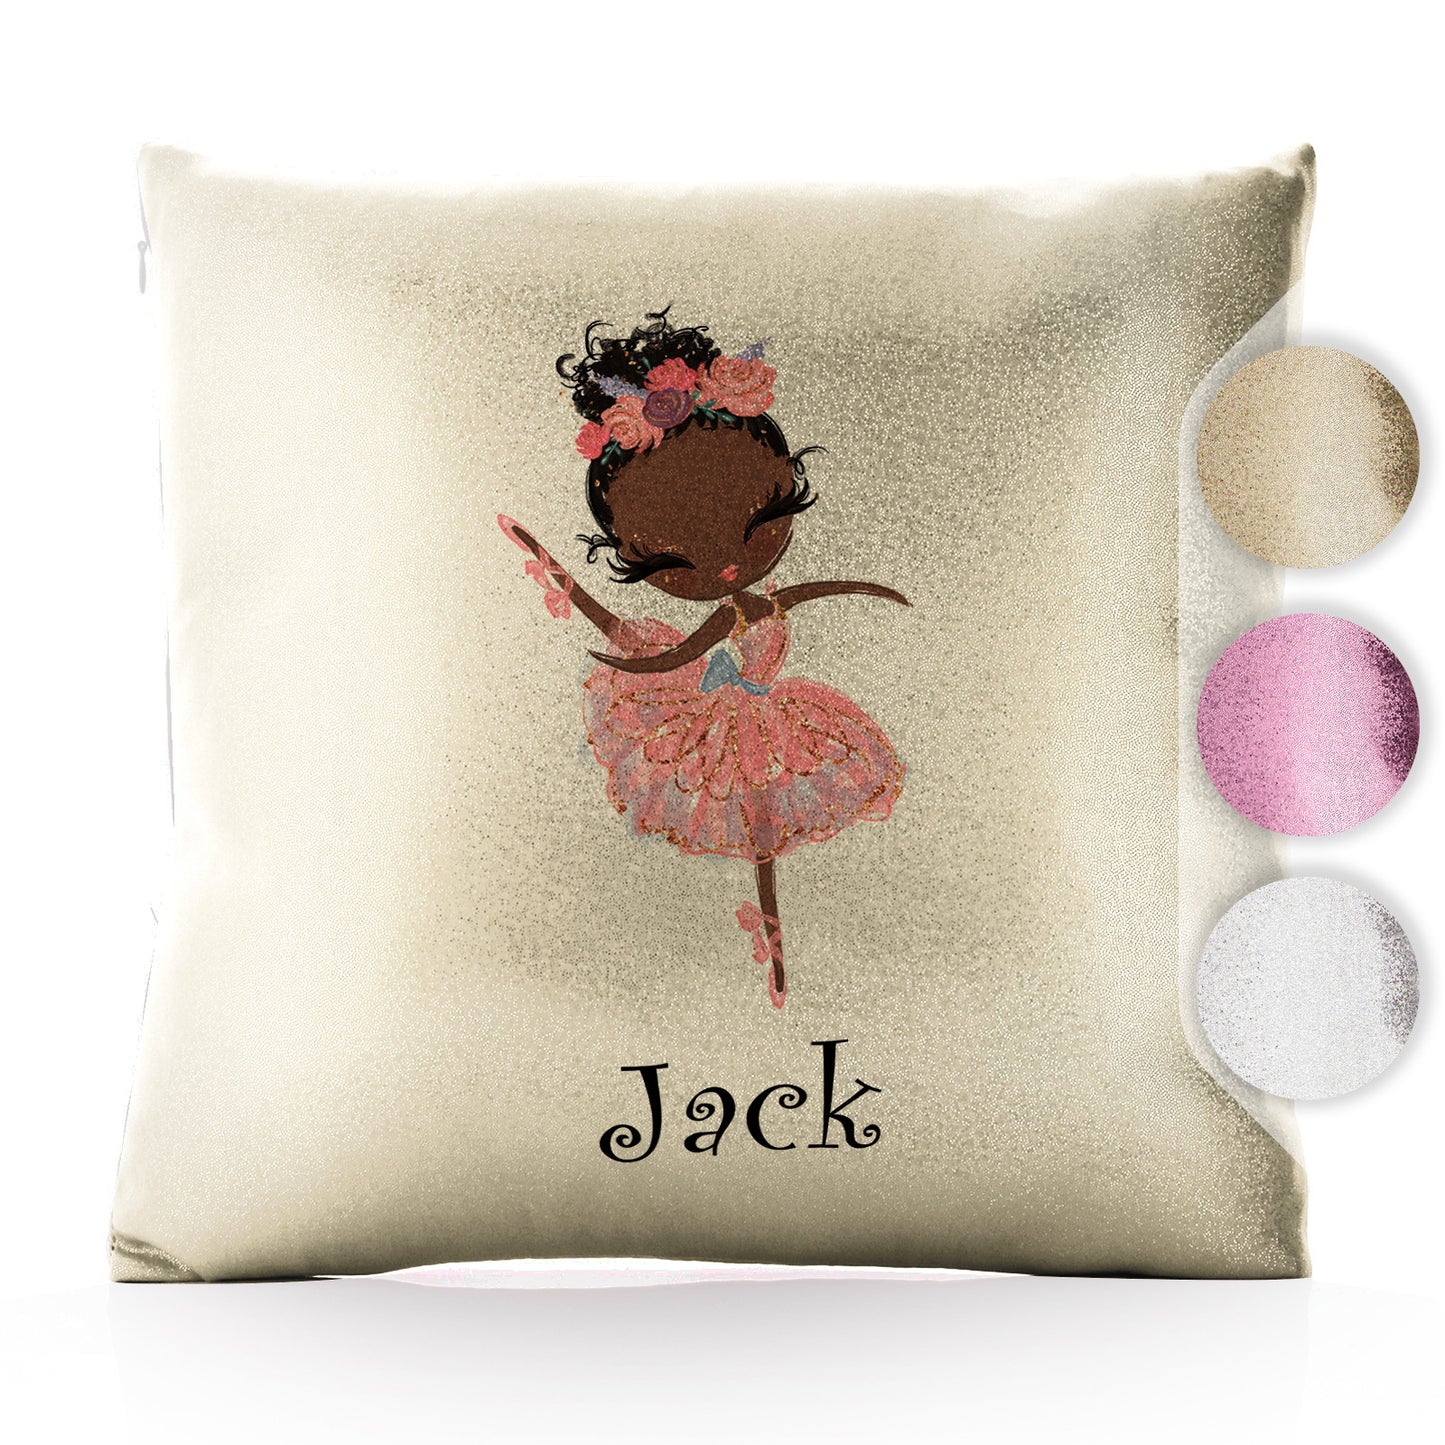 Personalised Glitter Cushion with Cute Text and Black Hair Pink Dress Ballerina